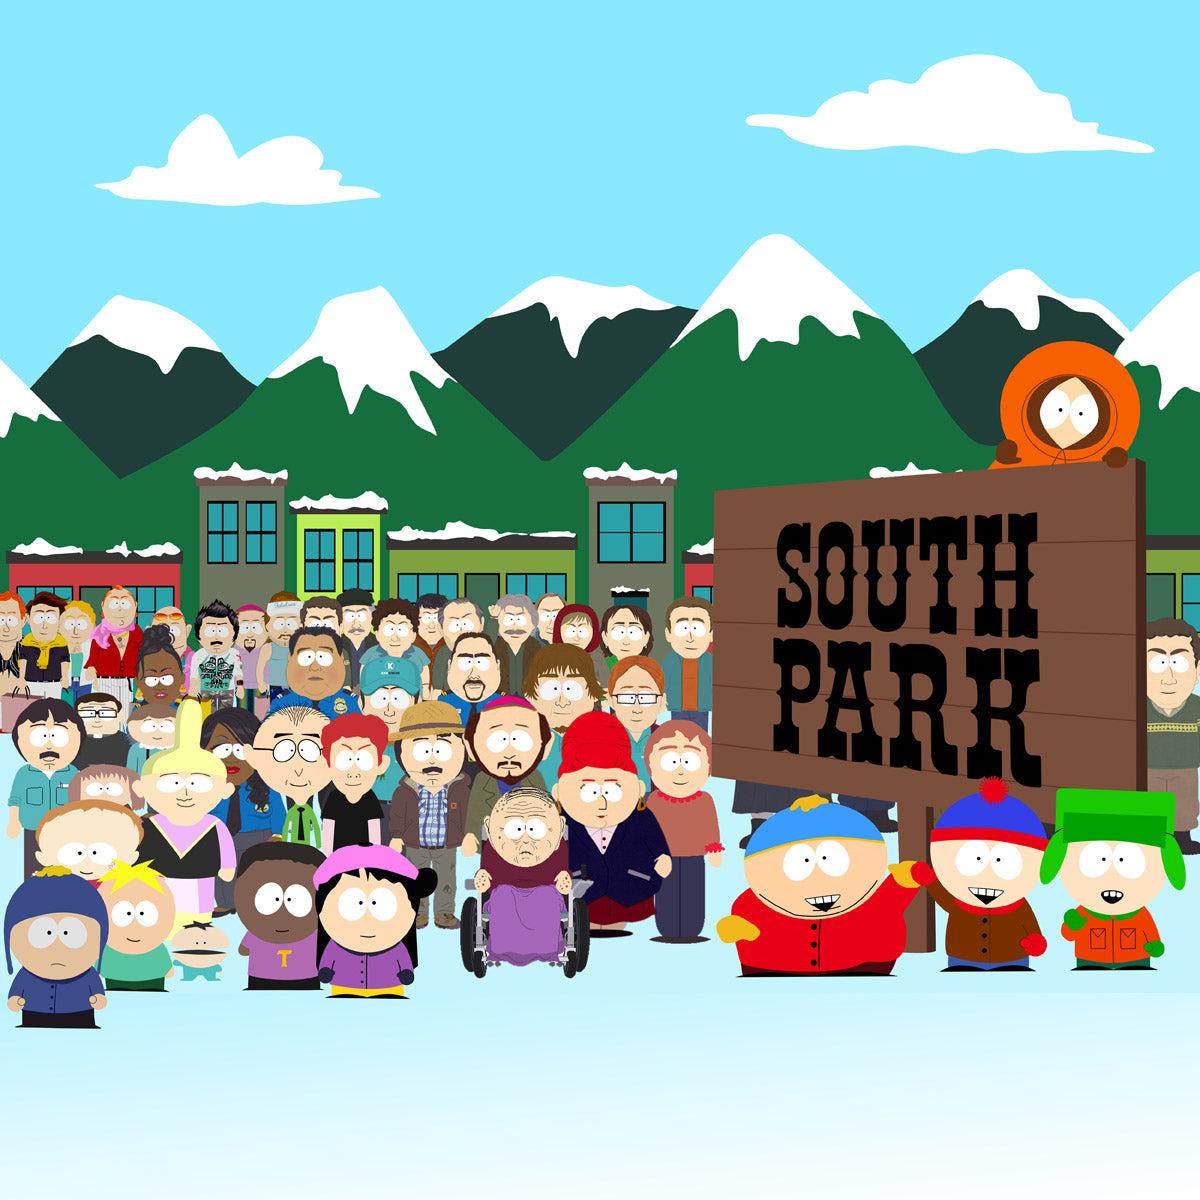 Come South to the Park